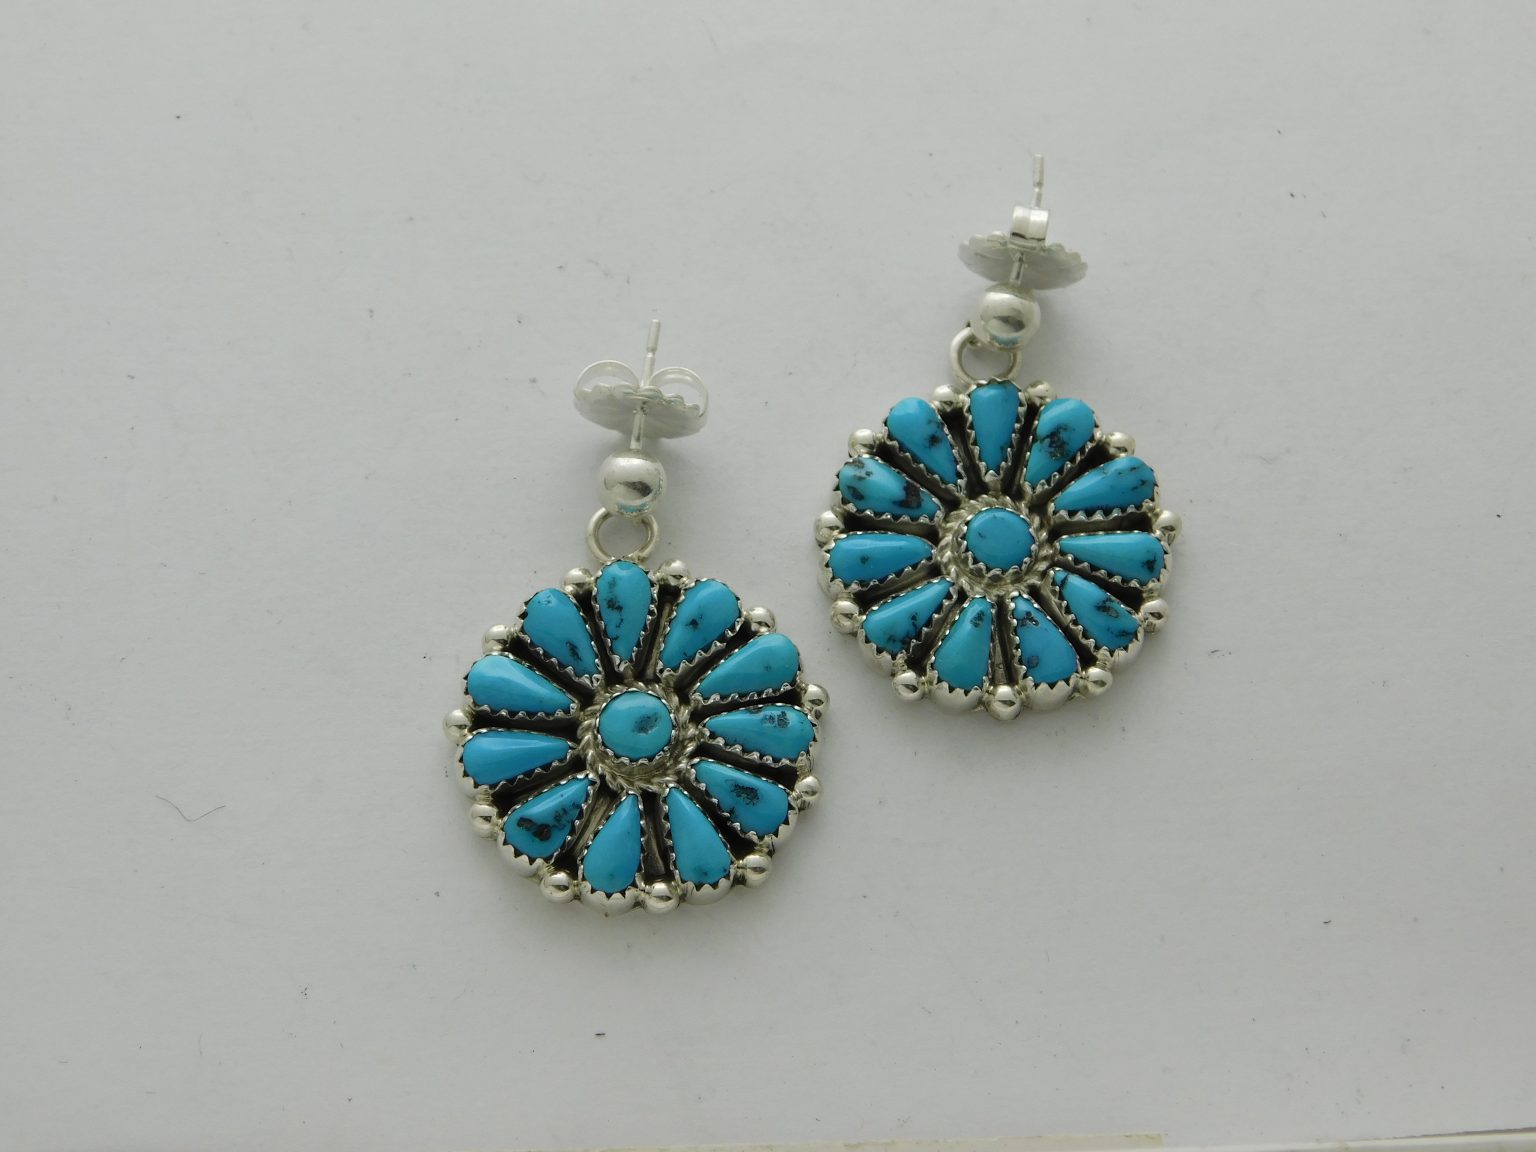 Fred Gorman Jr. Navajo Turquoise and Sterling Silver Cluster Earrings